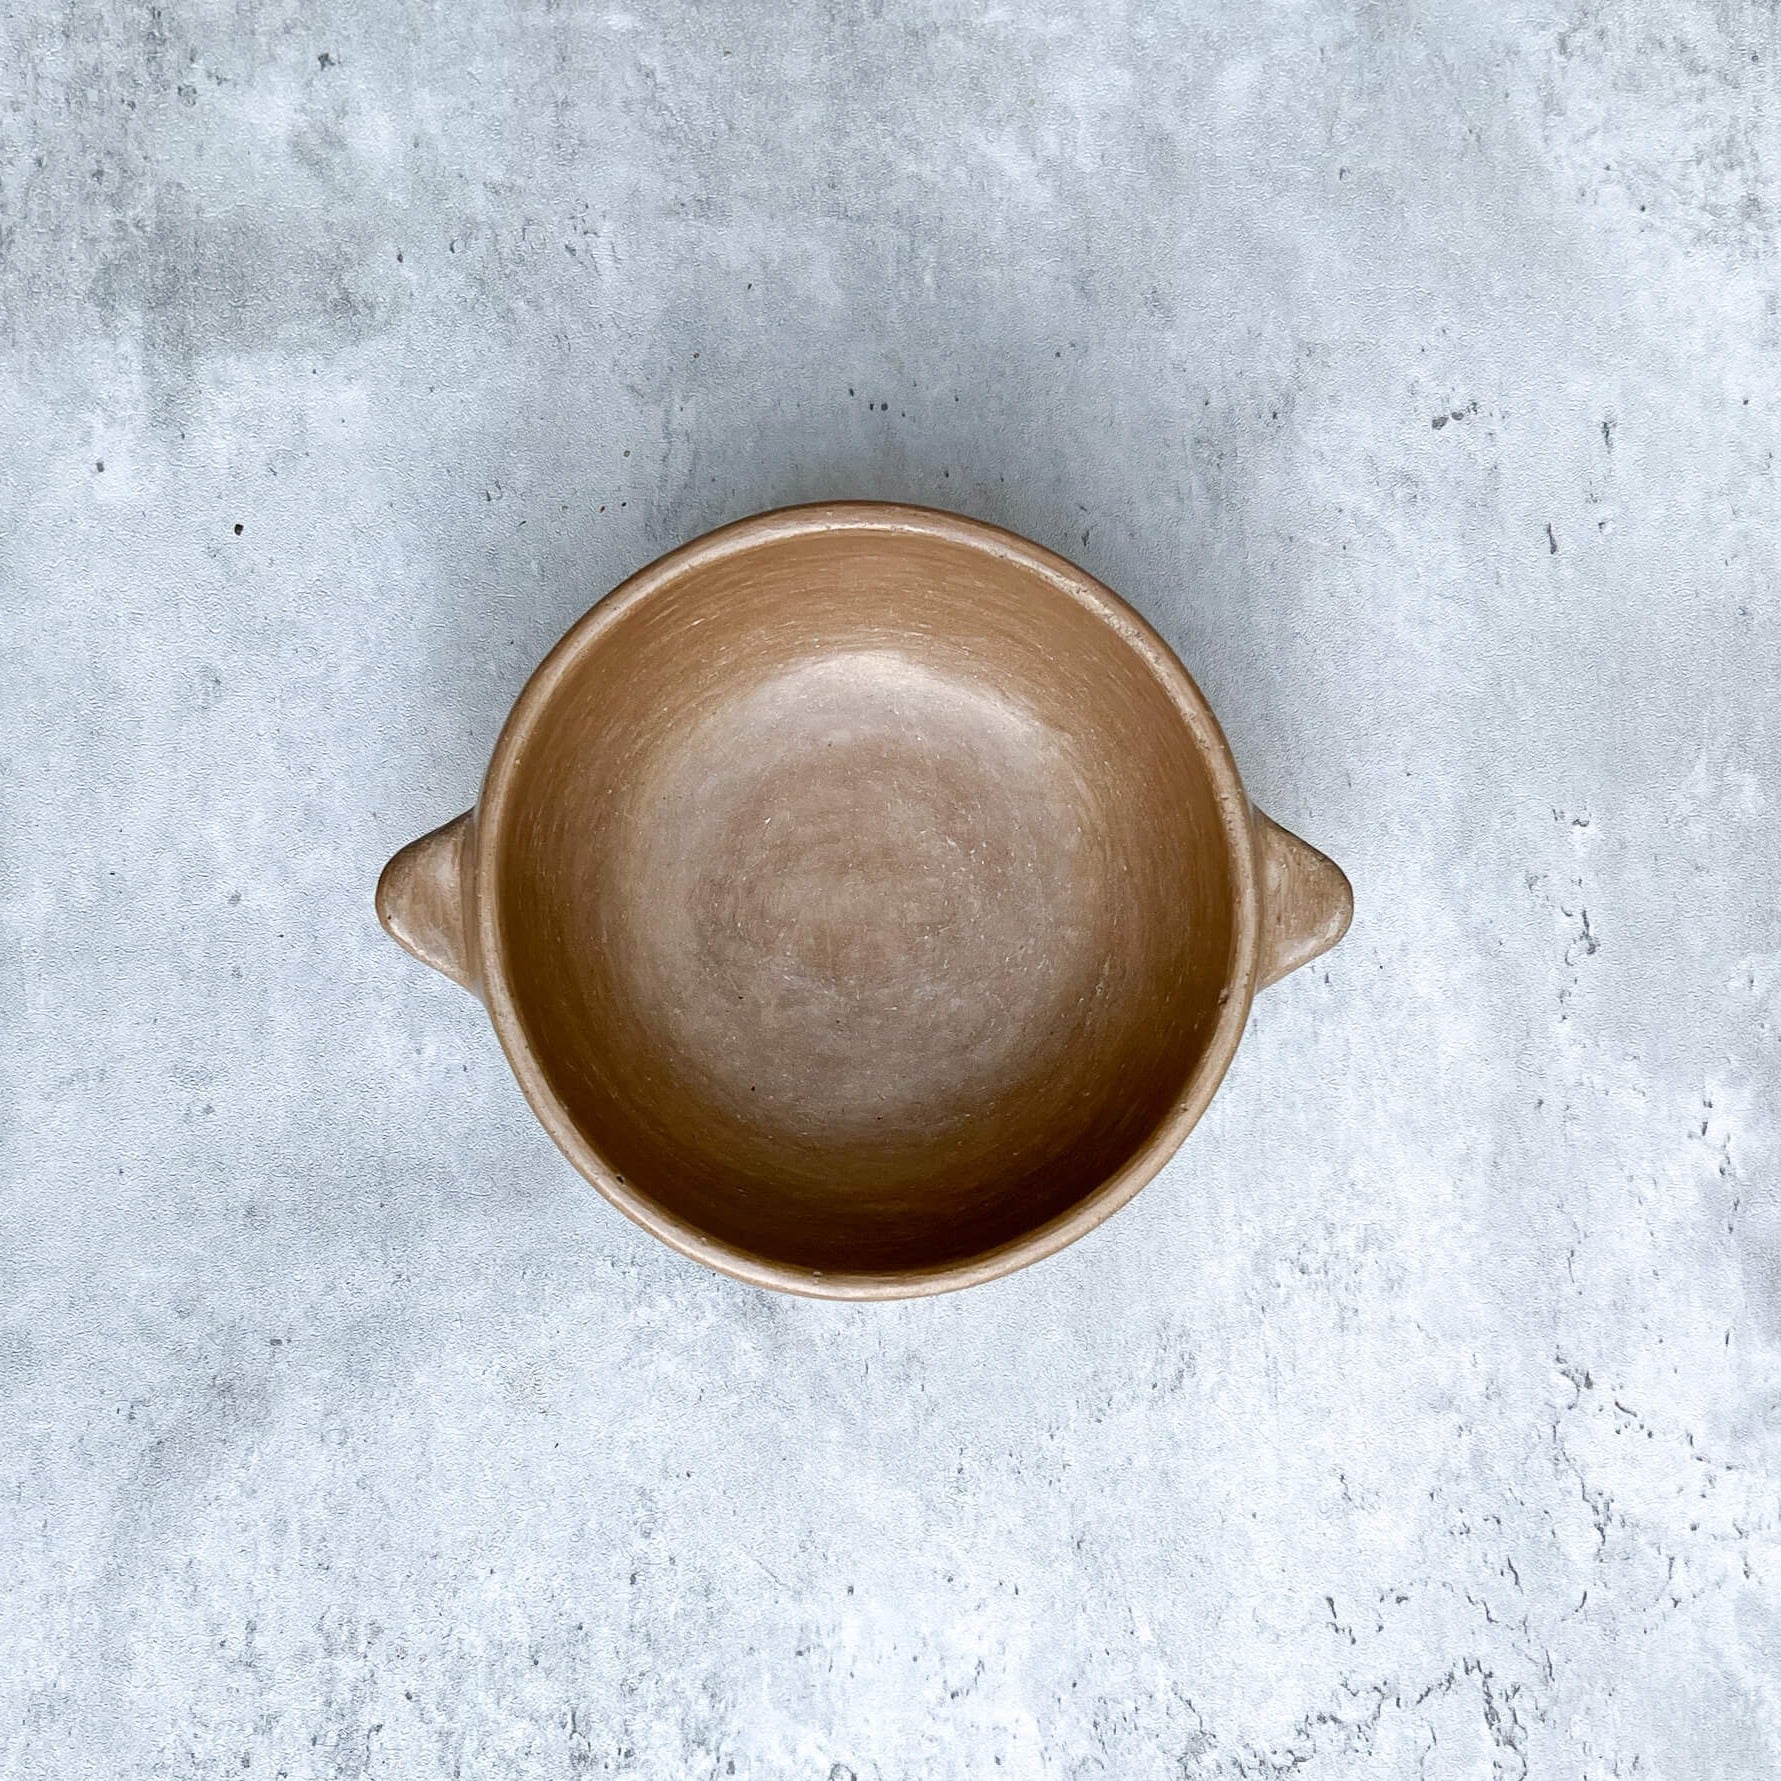 Small clay serving bowl made in Puebla.